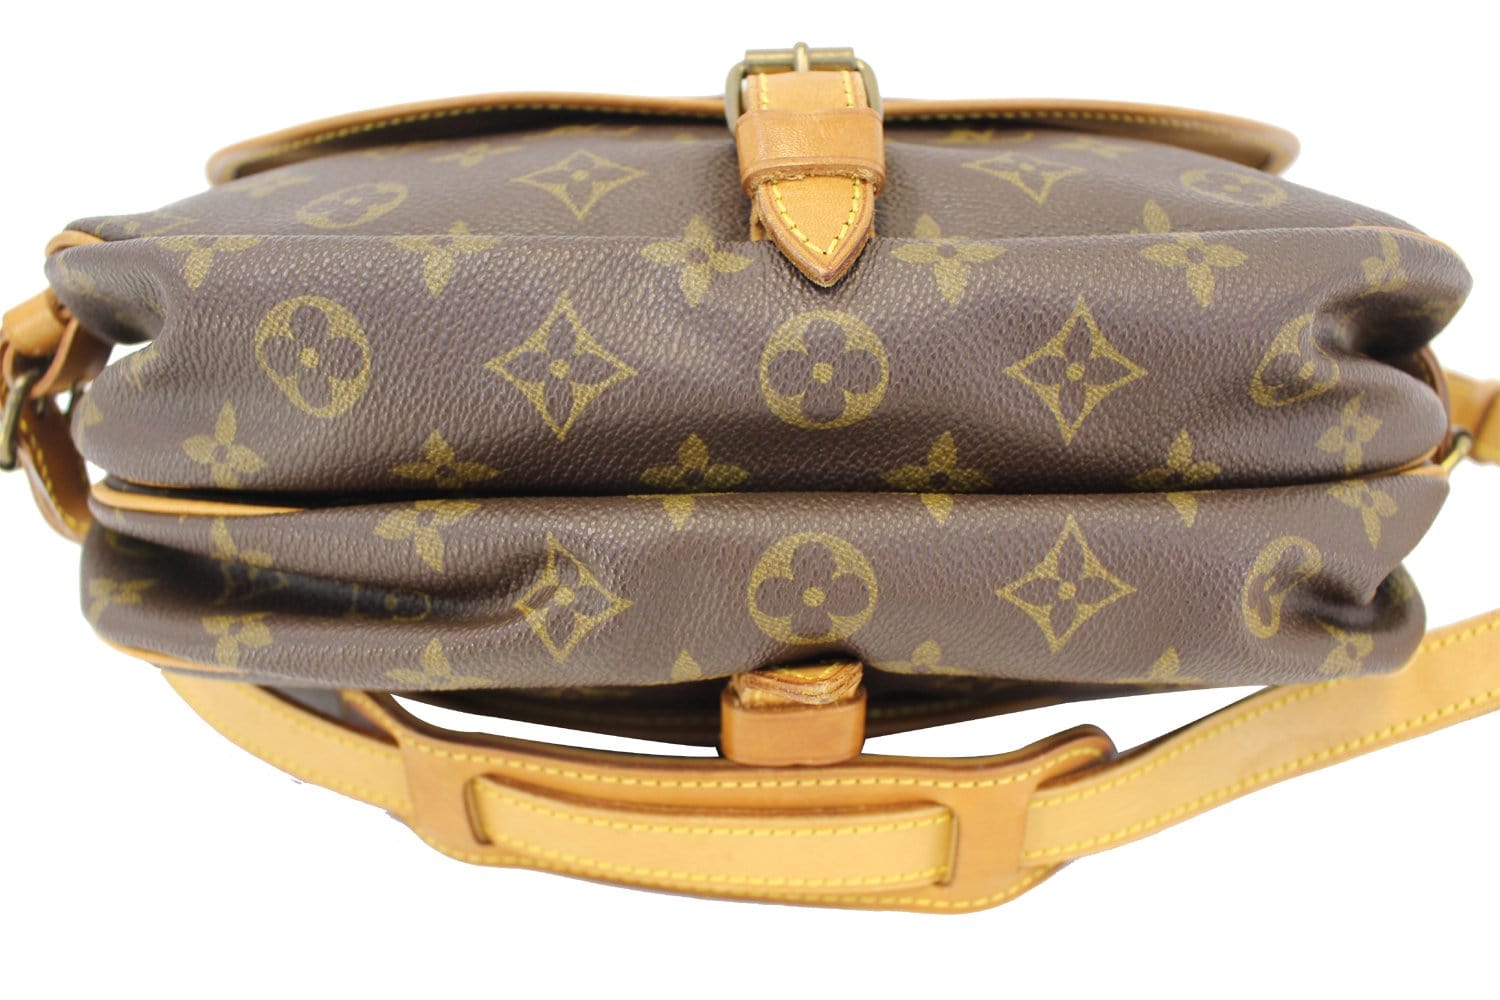 Louis Vuitton Saumur Women's Authentic Pre Owned Custom Painted Crossbody Bag Adjustable Strap Brown, Yellow Luxury Monogram Canvas